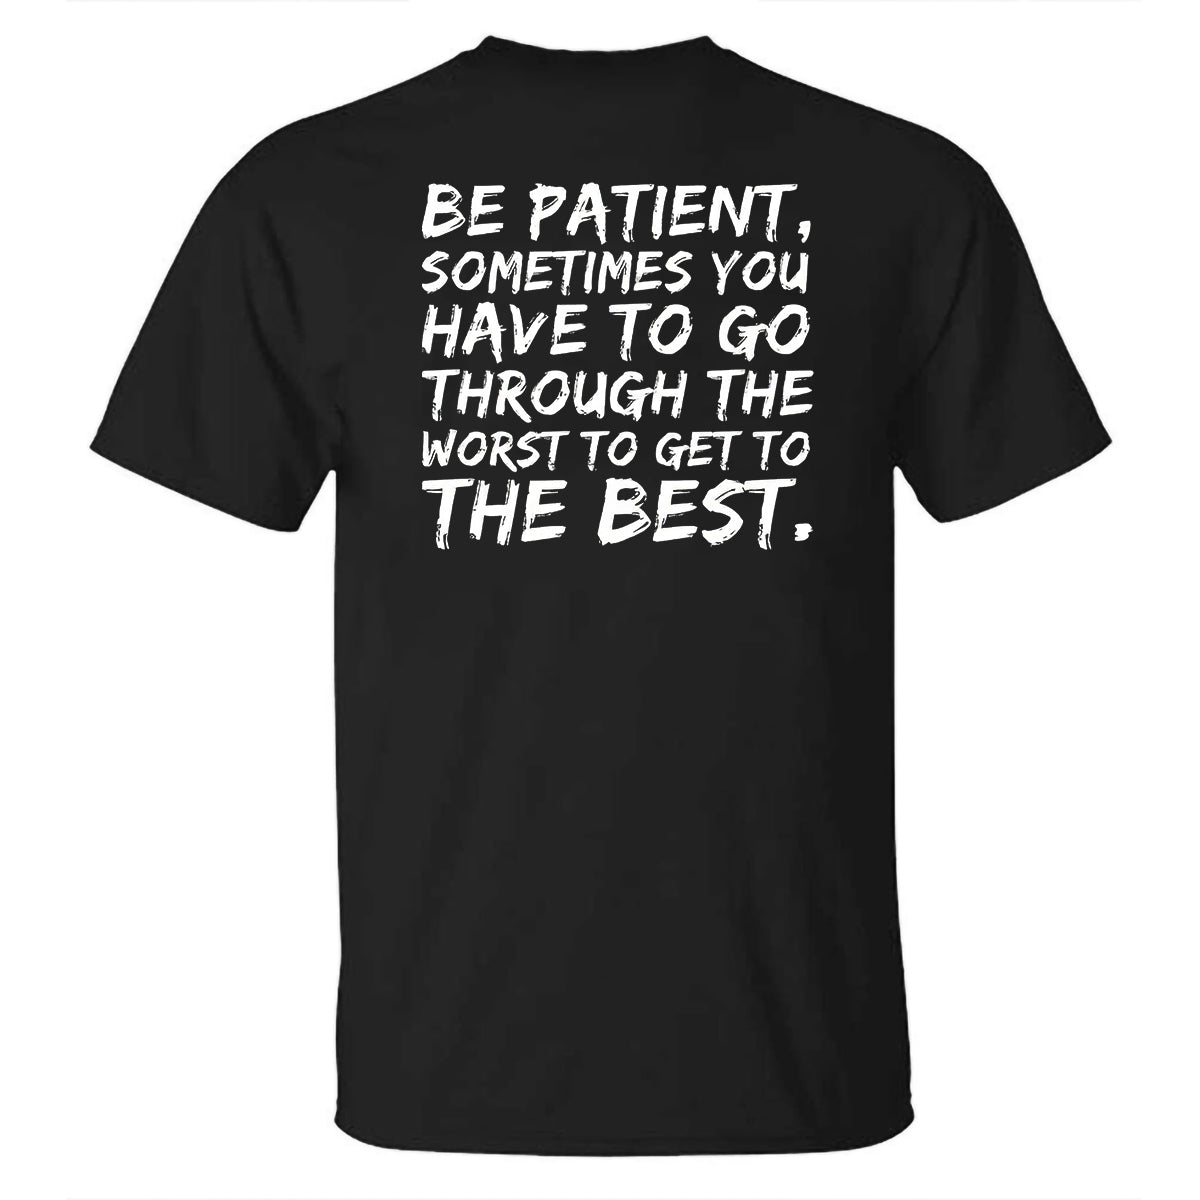 GrootWear Be Patient, Sometimes You Have To Go Through The Worst To Get To The Best Printed T-shirt